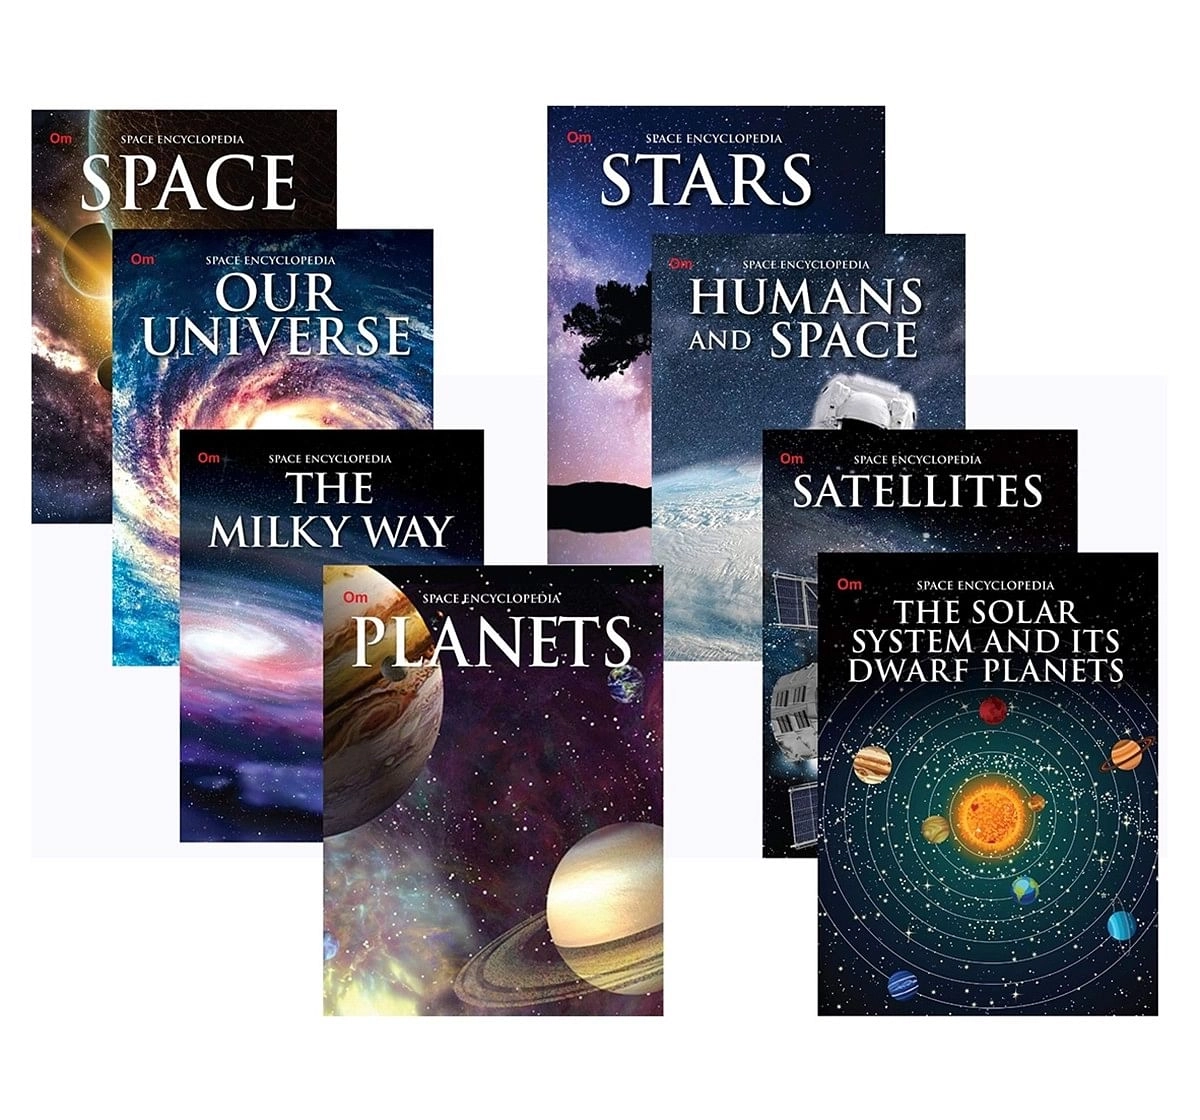 Encyclopedia Of Space - Set Of 8 Books, 256 Pages Book By Om Books Editorial Team, Paperback